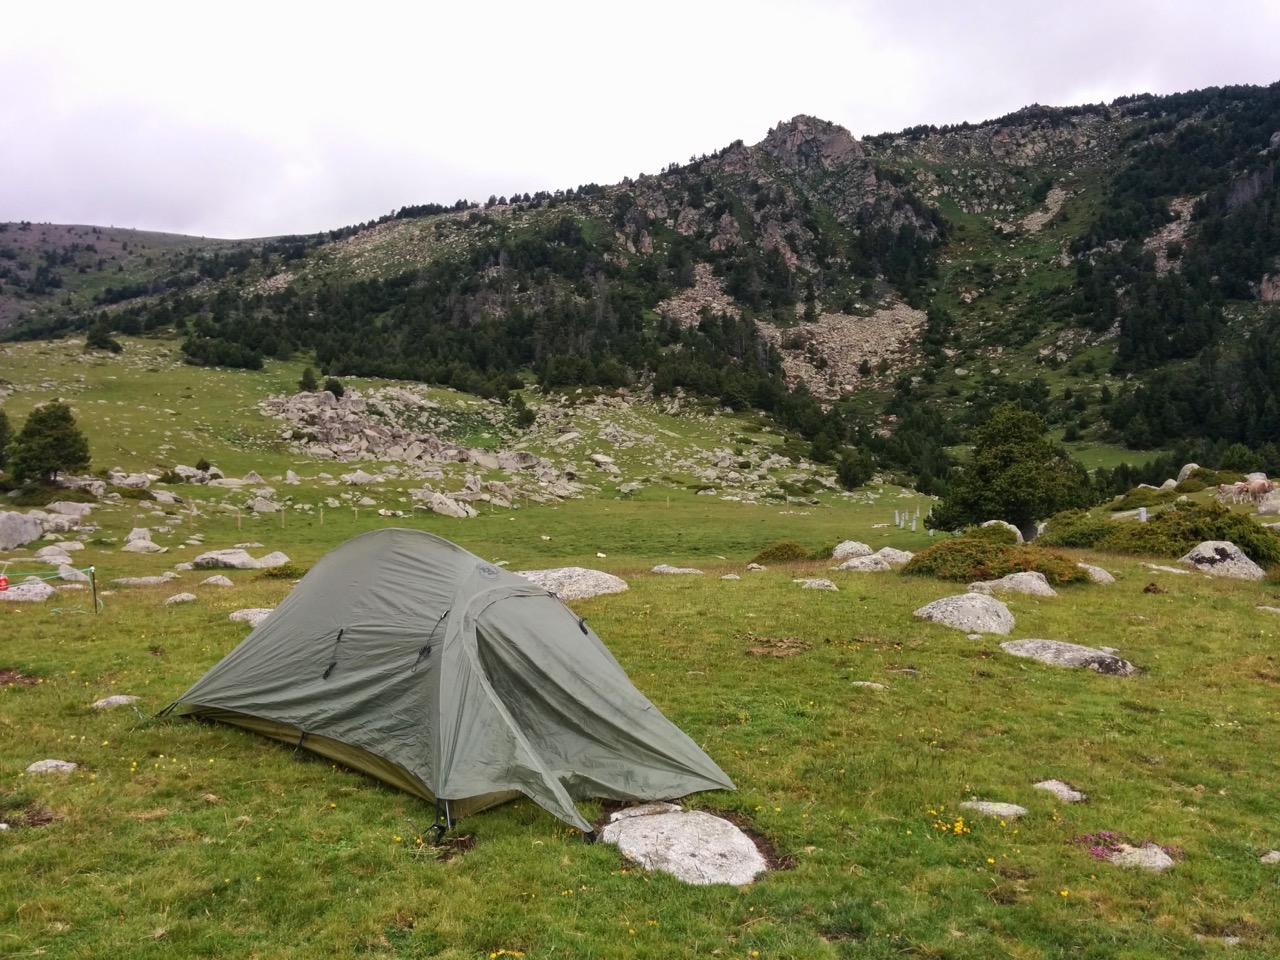 Wild camping is a free option for broke kids